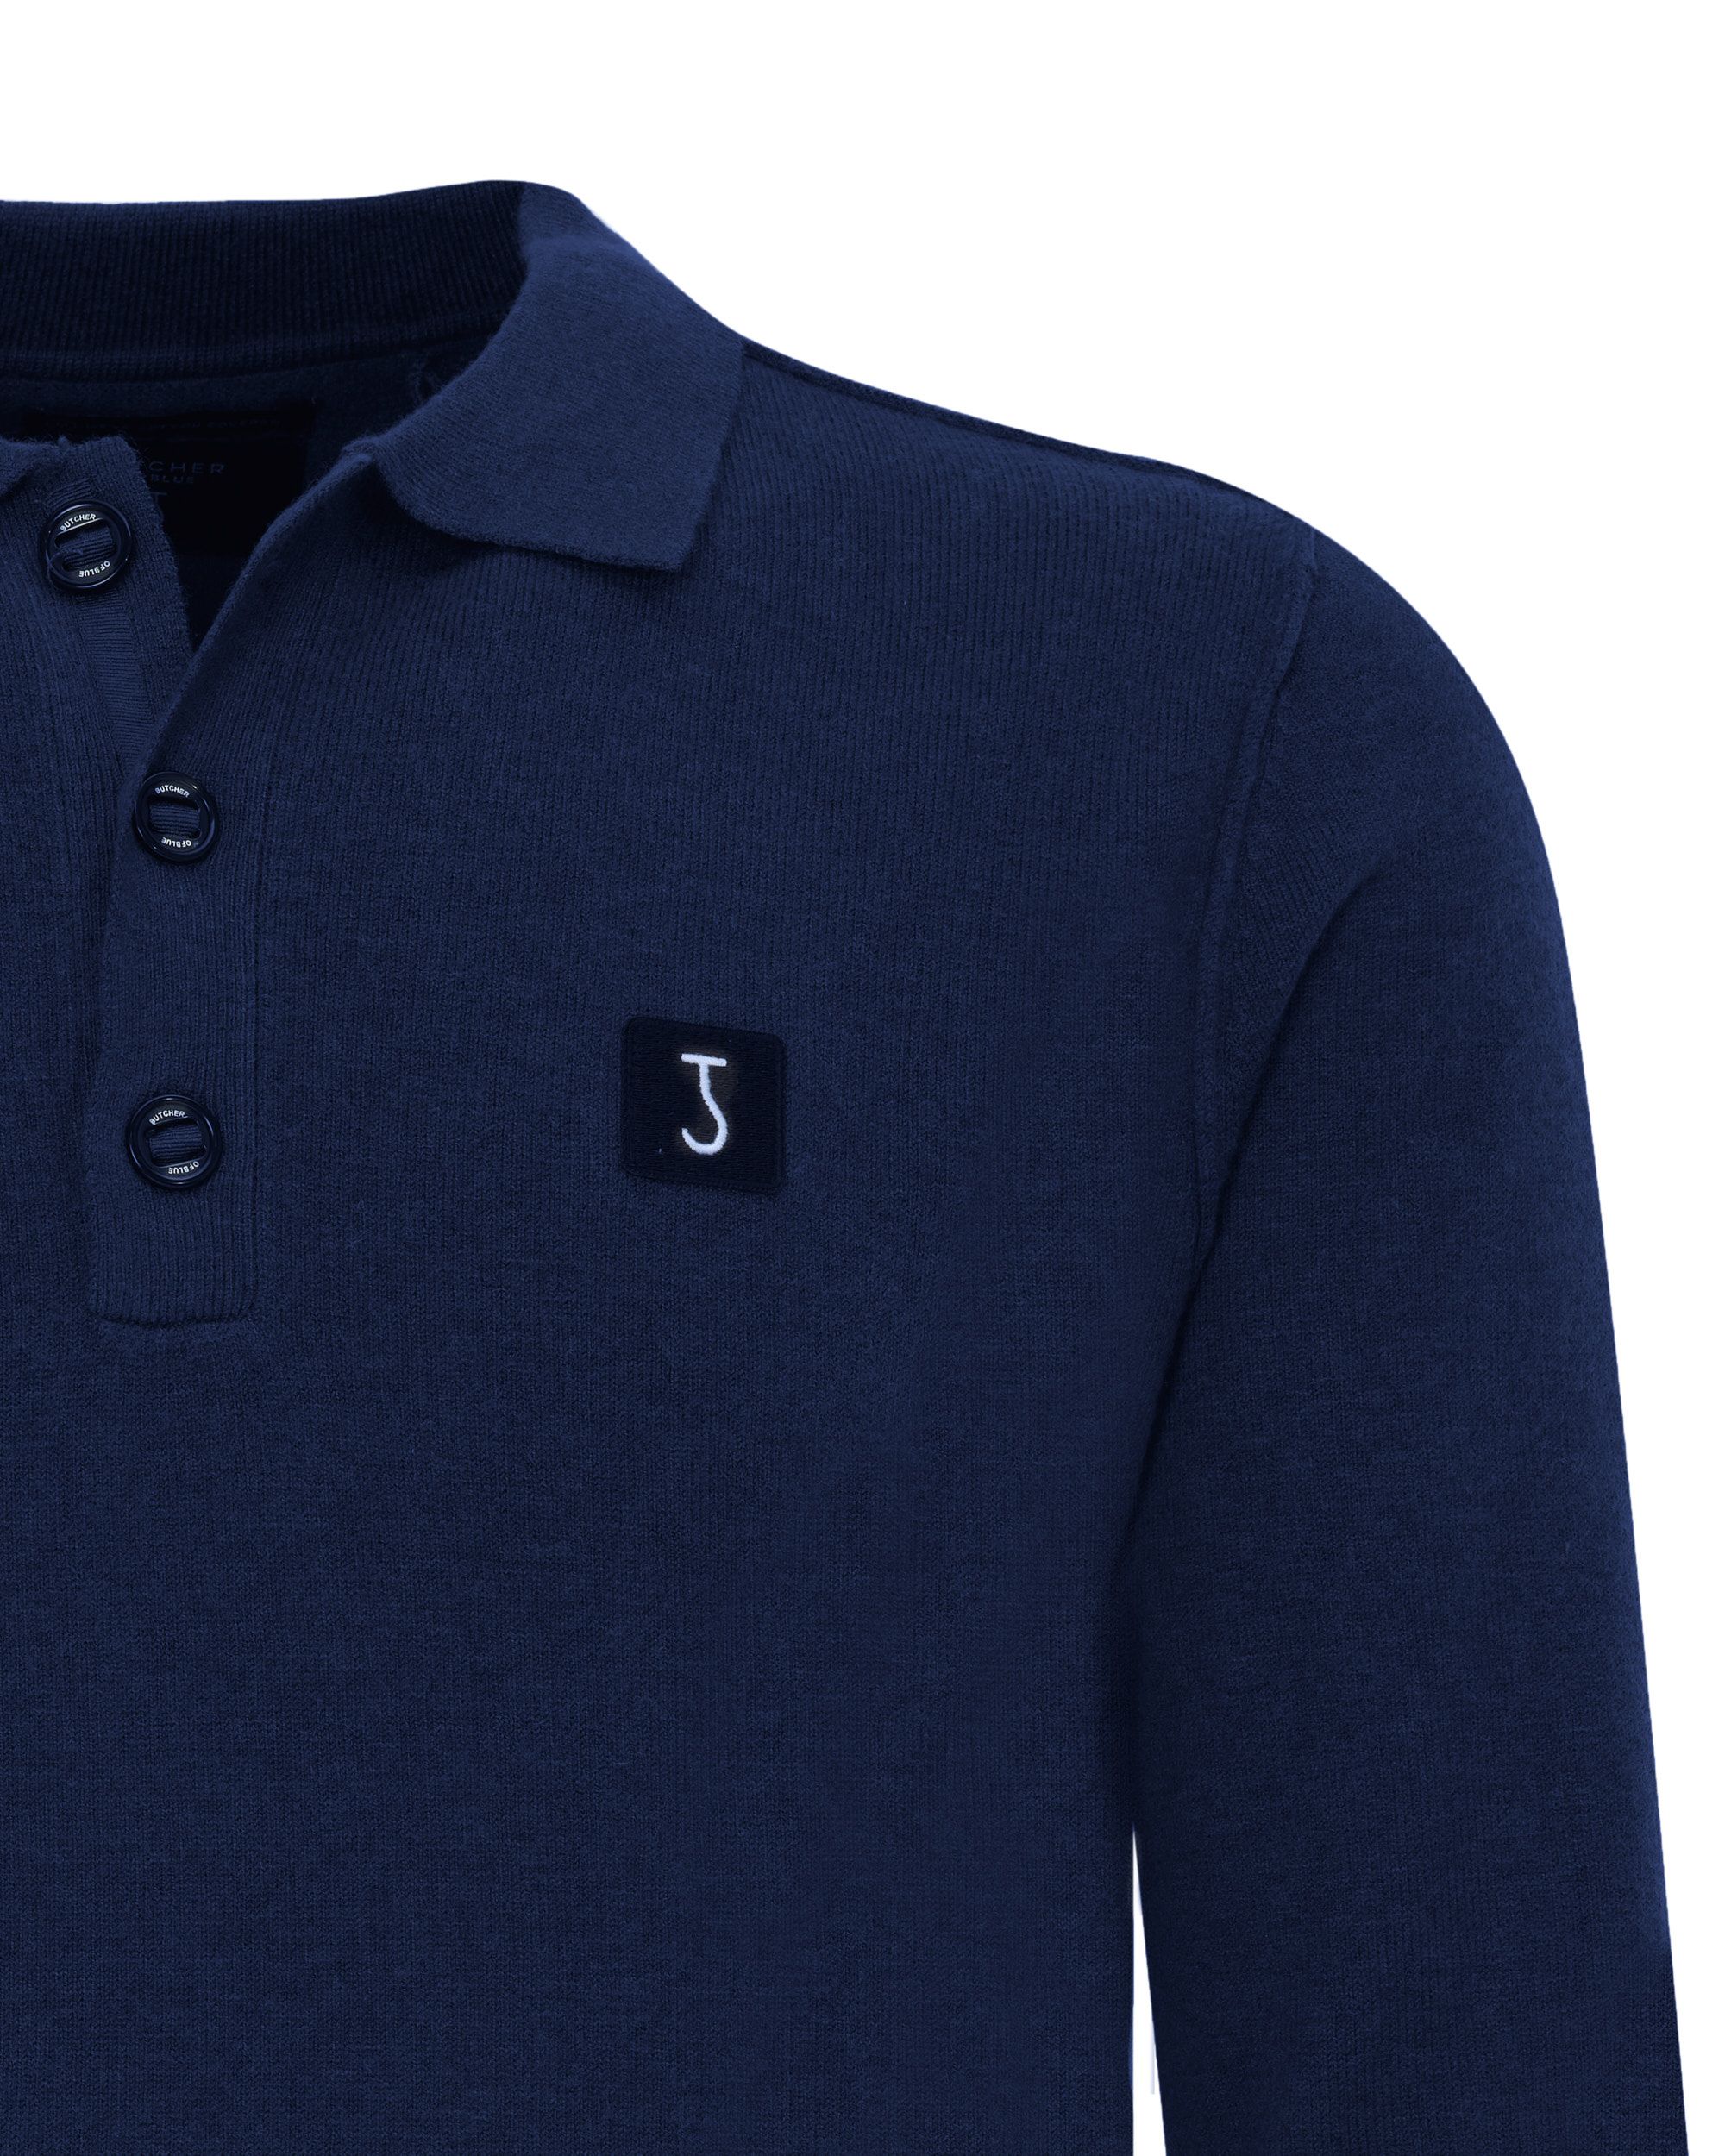 Butcher of Blue Clifden Polo LM Donker blauw 078904-001-L